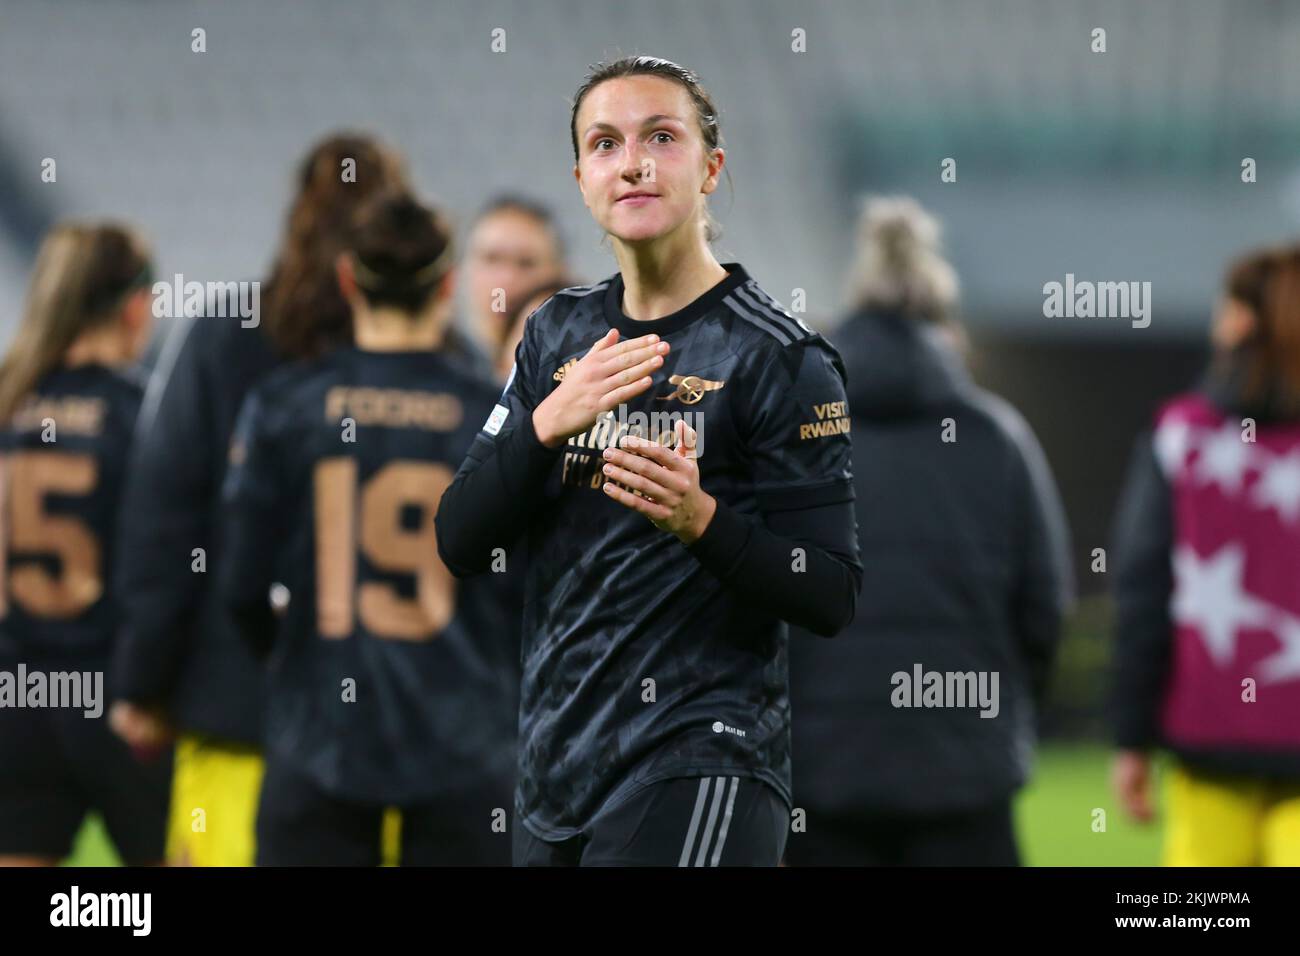 TURIN, ITALY, 24 NOVEMBER 2022. Lotte Wubben-Moy of Arsenal Women  during the UWCL match (Group C) between Juventus Women FC and Arsenal Women FC on November 24, 2022 at Allianz Stadium in Turin, Italy.  Credit: Massimiliano Ferraro/Alamy Live News Stock Photo